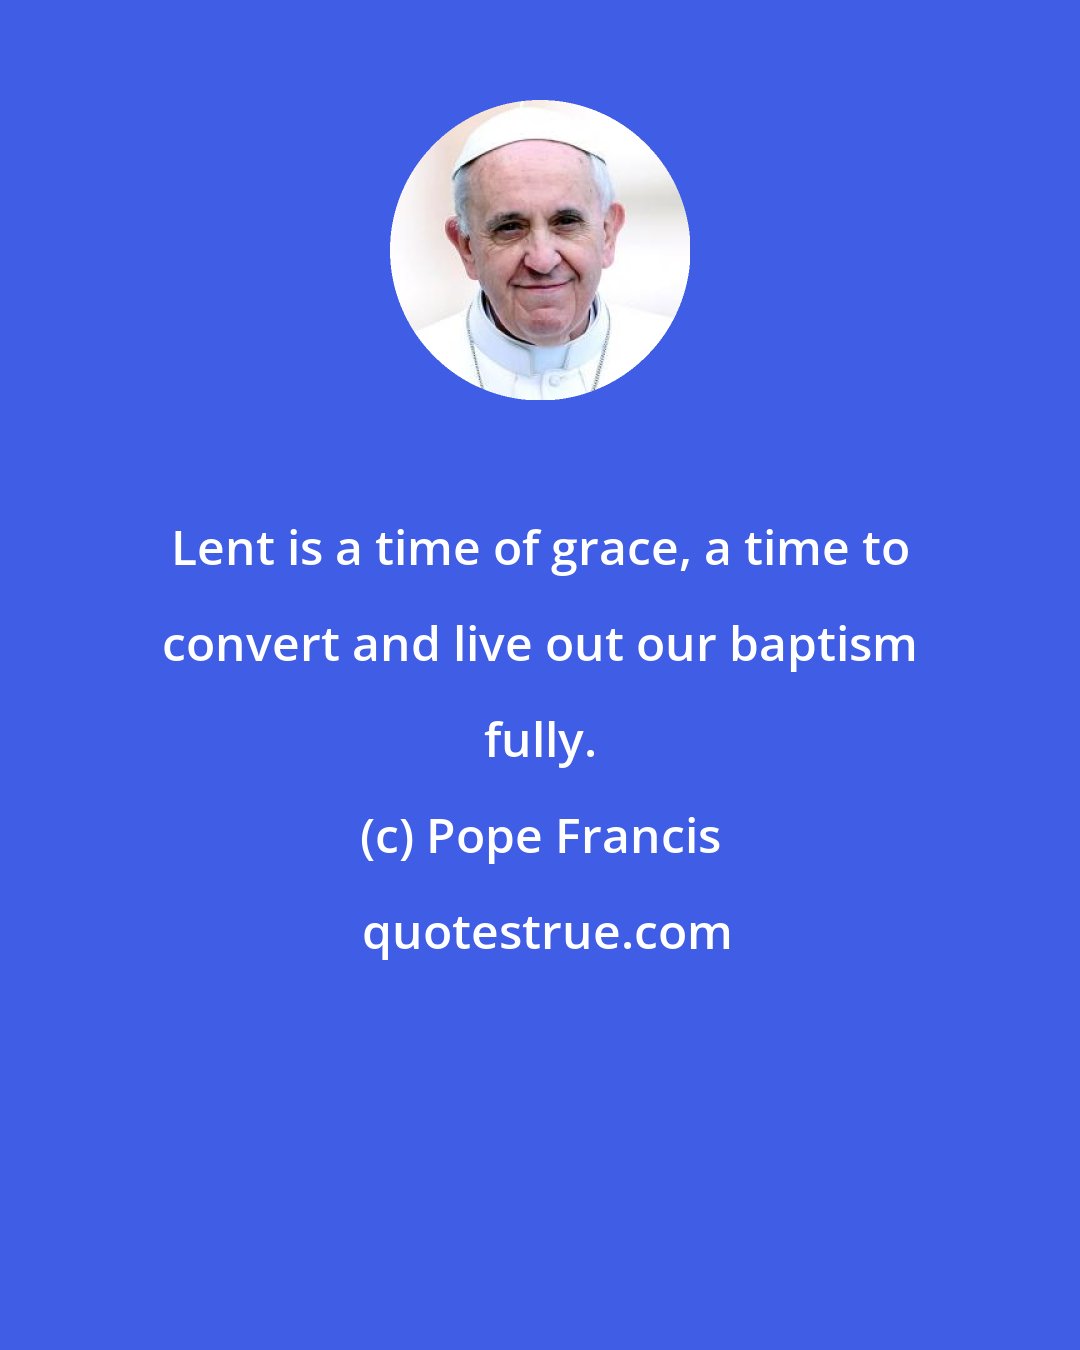 Pope Francis: Lent is a time of grace, a time to convert and live out our baptism fully.